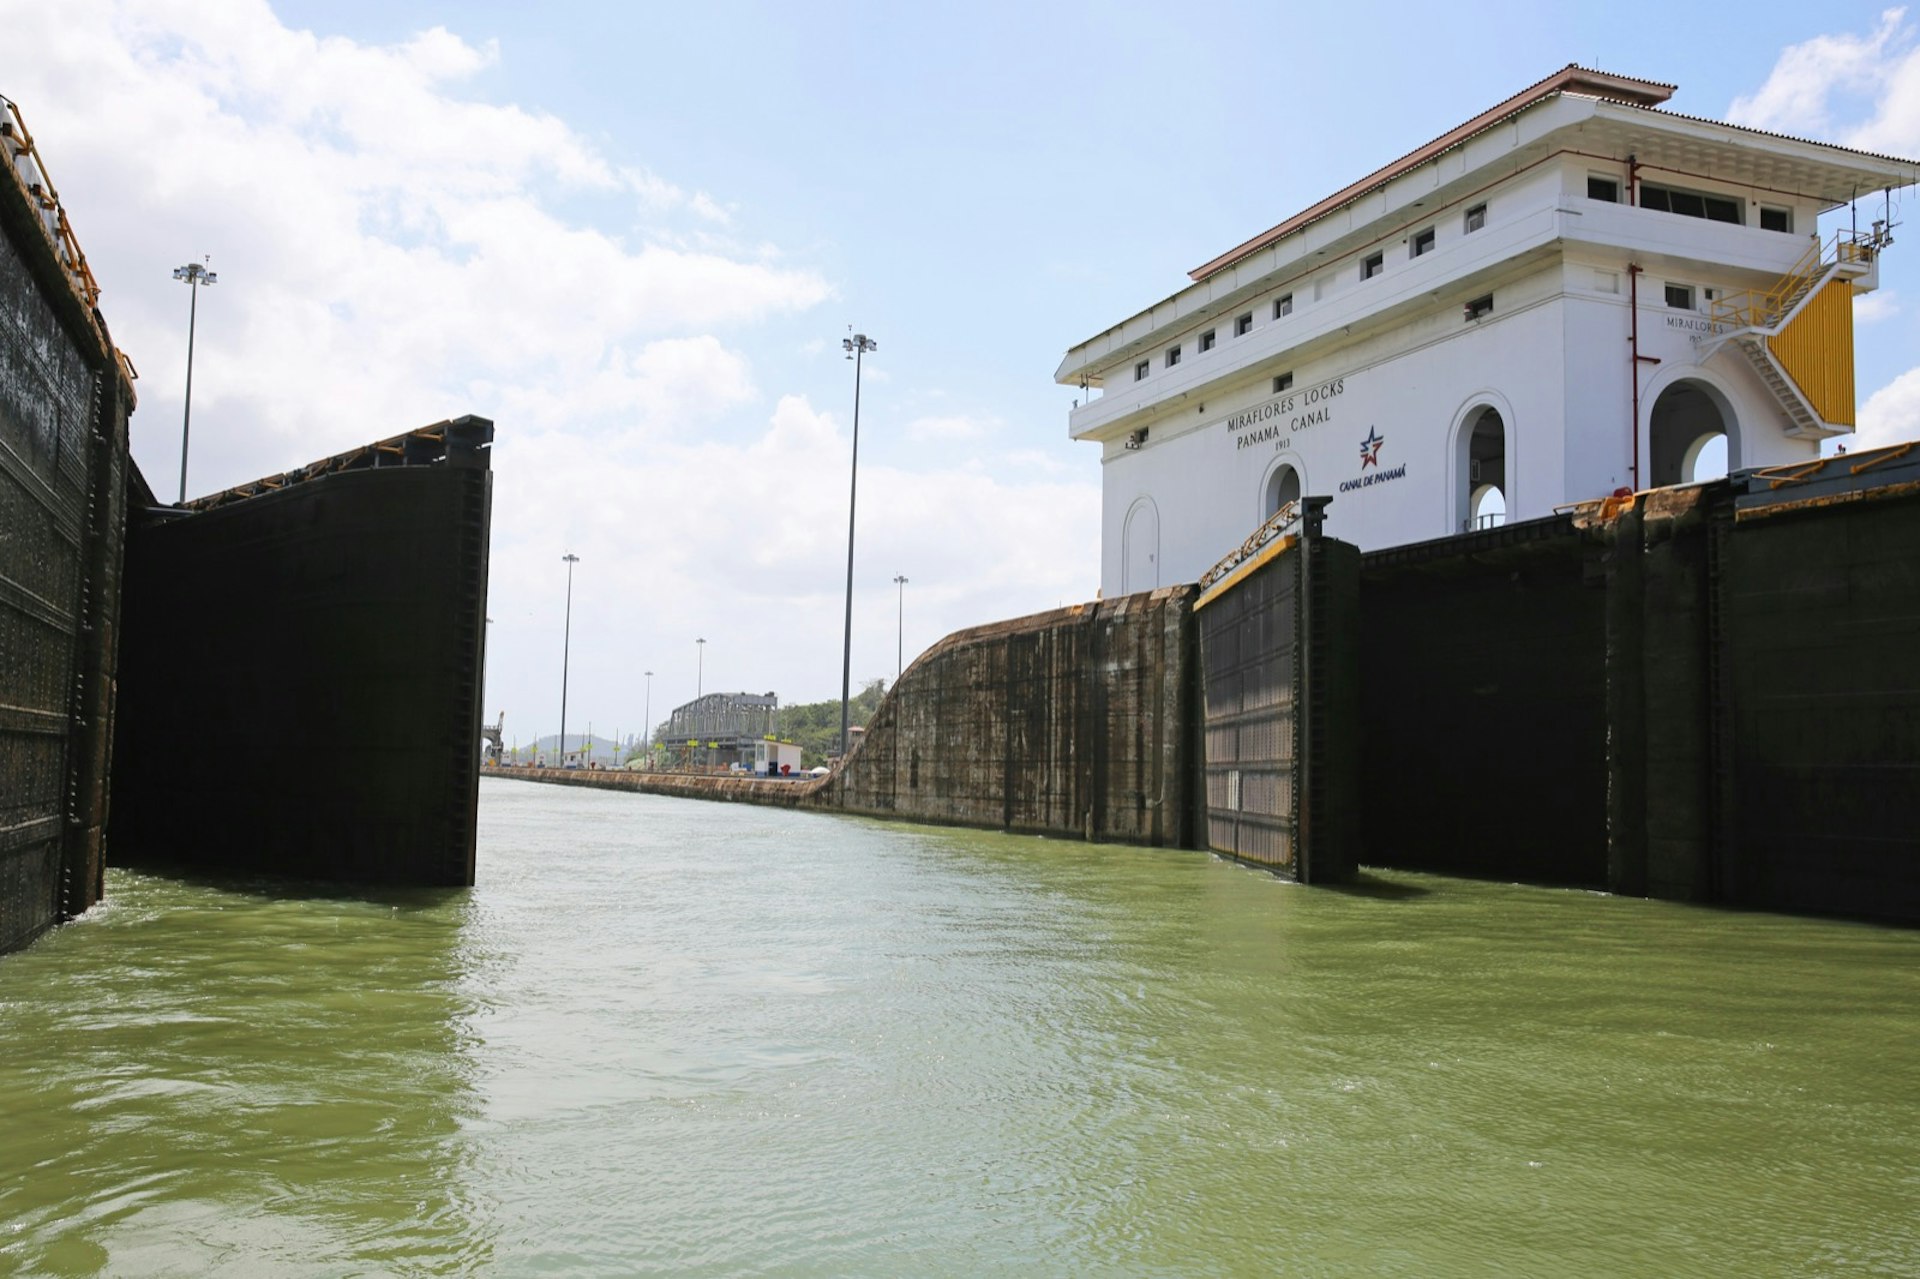 Actually being on the canal provides a unique look at the locks operating the Panama Canal Mark Dozier / Shutterstock